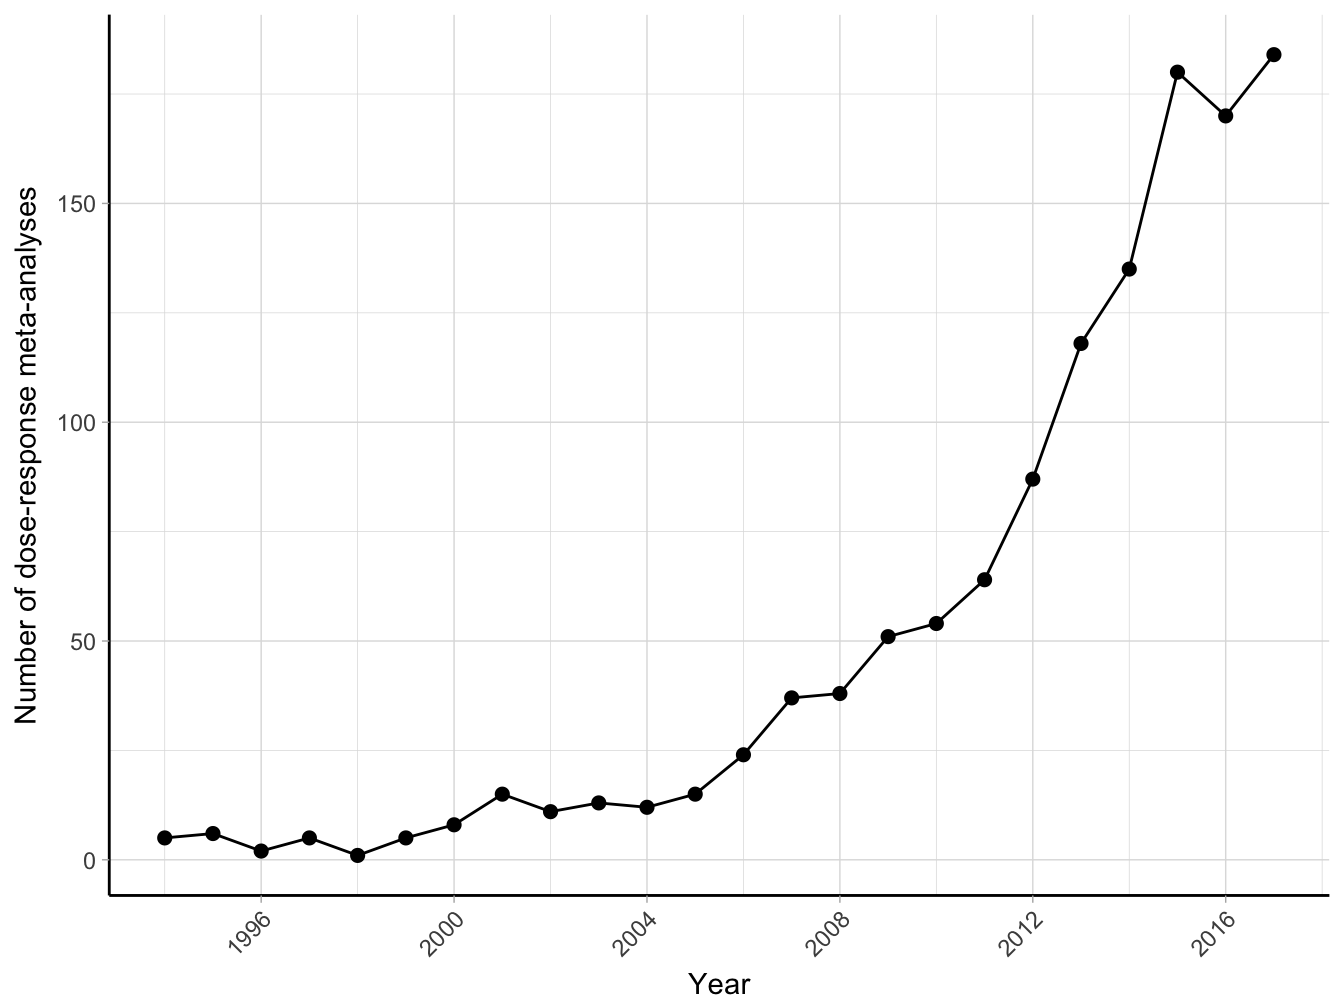 Number of citations of the paper by Greenland and Longnecker (1992) obtained from Google Scholar 1992-2017 (until January 2018).